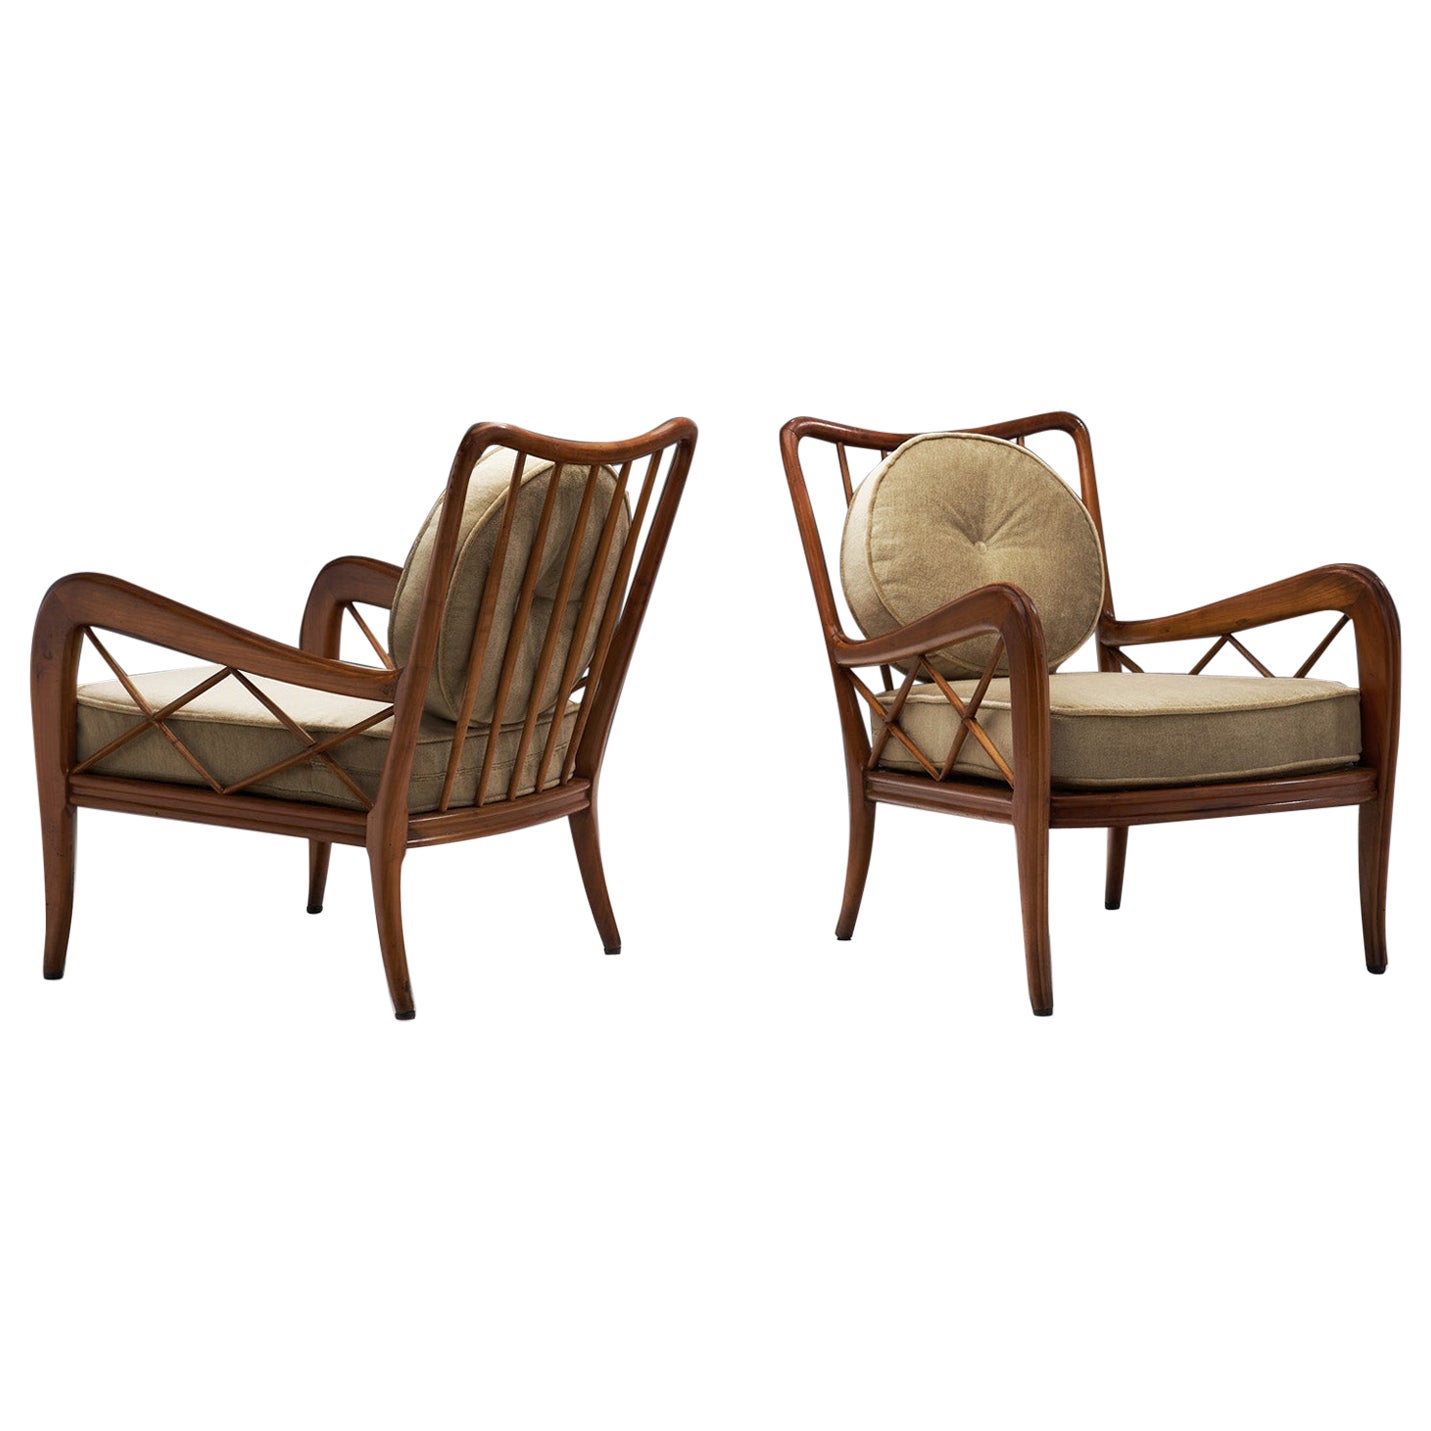 Italian Modern Lounge Chairs Attributed to Paolo Buffa, Italy 1940s